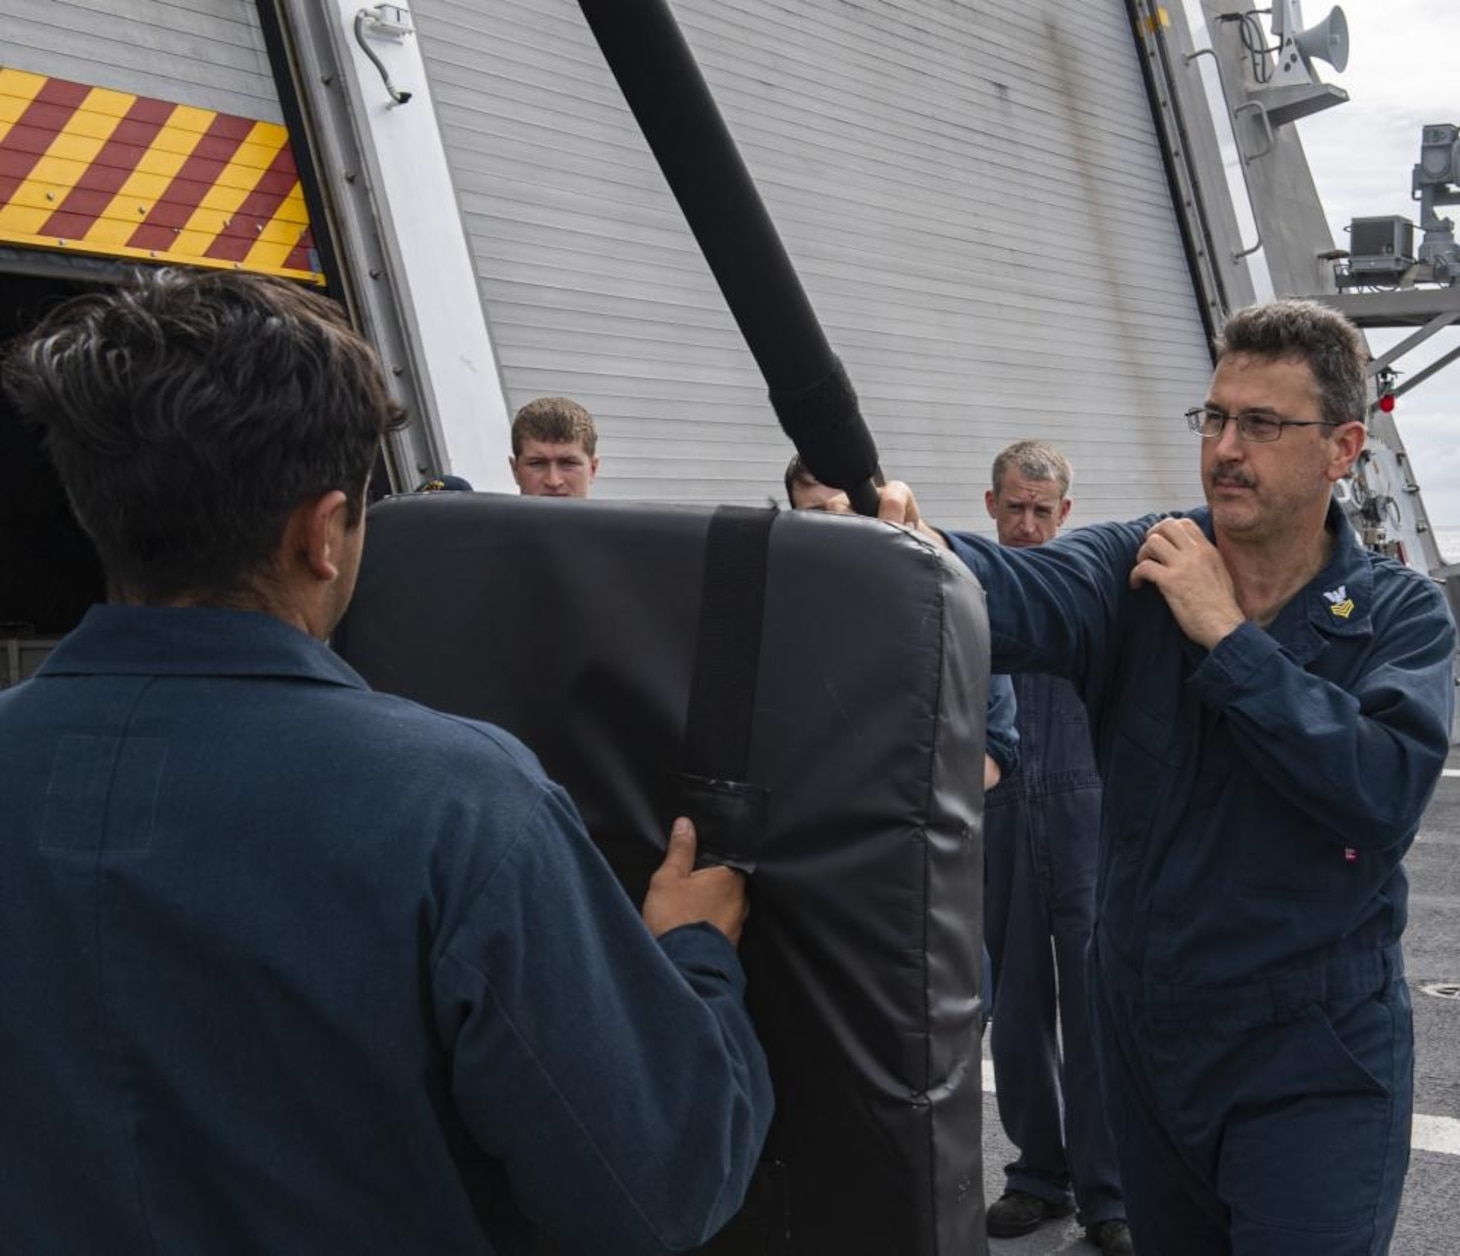 SULU SEA (SEP. 09, 2021) Mineman 1st Class Frederick Werner from Haddonfield, N.J., conducts non-lethal weapons training exercise aboard the Independence-variant littoral combat ship USS Tulsa (LCS 16), Sep. 09, 2021. Tulsa, part of Destroyer Squadron Seven, is on a rotational deployment in the U.S. 7th Fleet area of operation to enhance interoperability with partners and serve as a ready-response force in support of a free and open Indo-Pacific region. (U.S. Navy photo by Mass Communication Specialist 3rd Class Richard Cho)